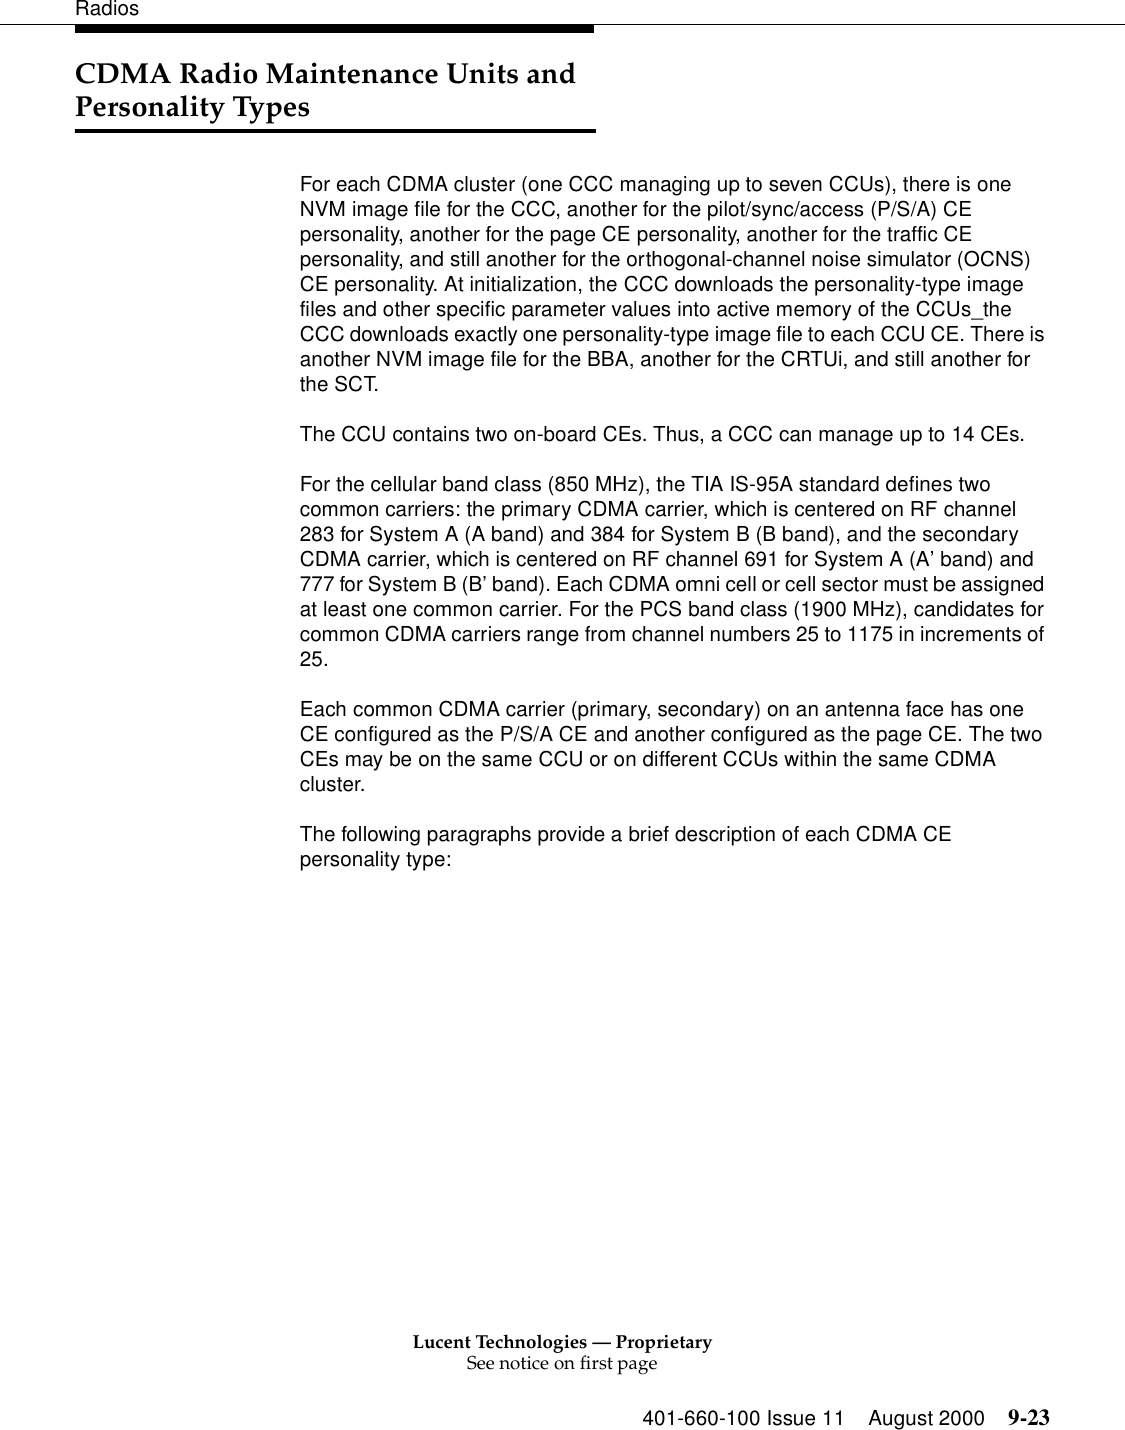 Lucent Technologies — ProprietarySee notice on first page401-660-100 Issue 11 August 2000 9-23RadiosCDMA Radio Maintenance Units and Personality TypesFor each CDMA cluster (one CCC managing up to seven CCUs), there is one NVM image file for the CCC, another for the pilot/sync/access (P/S/A) CE personality, another for the page CE personality, another for the traffic CE personality, and still another for the orthogonal-channel noise simulator (OCNS) CE personality. At initialization, the CCC downloads the personality-type image files and other specific parameter values into active memory of the CCUs_the CCC downloads exactly one personality-type image file to each CCU CE. There is another NVM image file for the BBA, another for the CRTUi, and still another for the SCT. The CCU contains two on-board CEs. Thus, a CCC can manage up to 14 CEs. For the cellular band class (850 MHz), the TIA IS-95A standard defines two common carriers: the primary CDMA carrier, which is centered on RF channel 283 for System A (A band) and 384 for System B (B band), and the secondary CDMA carrier, which is centered on RF channel 691 for System A (A’ band) and 777 for System B (B’ band). Each CDMA omni cell or cell sector must be assigned at least one common carrier. For the PCS band class (1900 MHz), candidates for common CDMA carriers range from channel numbers 25 to 1175 in increments of 25. Each common CDMA carrier (primary, secondary) on an antenna face has one CE configured as the P/S/A CE and another configured as the page CE. The two CEs may be on the same CCU or on different CCUs within the same CDMA cluster. The following paragraphs provide a brief description of each CDMA CE personality type: 